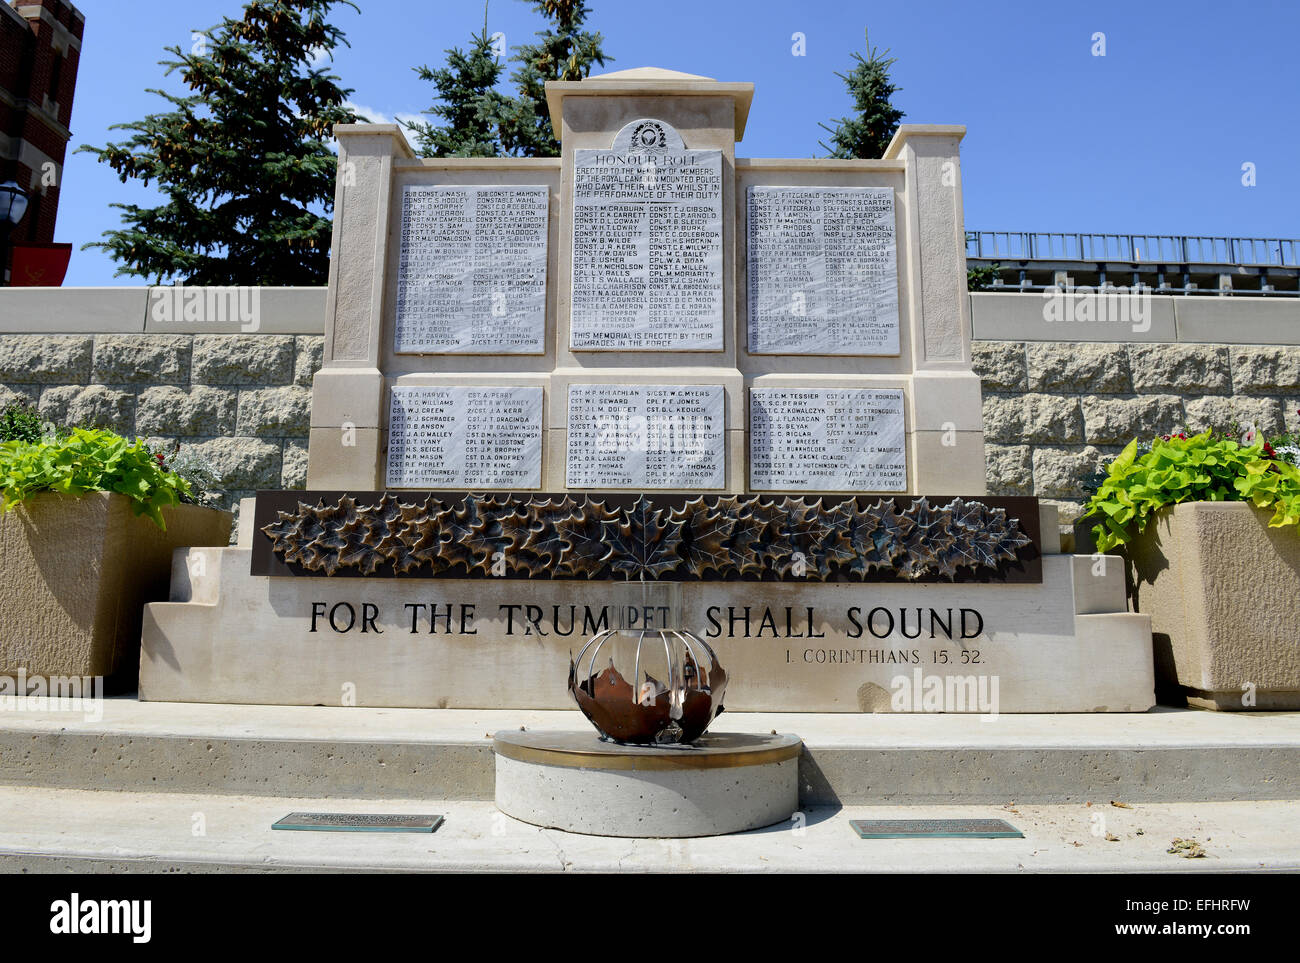 Memorial to Police who died on duty, Royal Canadian Mounted Police Depot, RCMP training academy in Regina, Saskatchewan, Canada Stock Photo